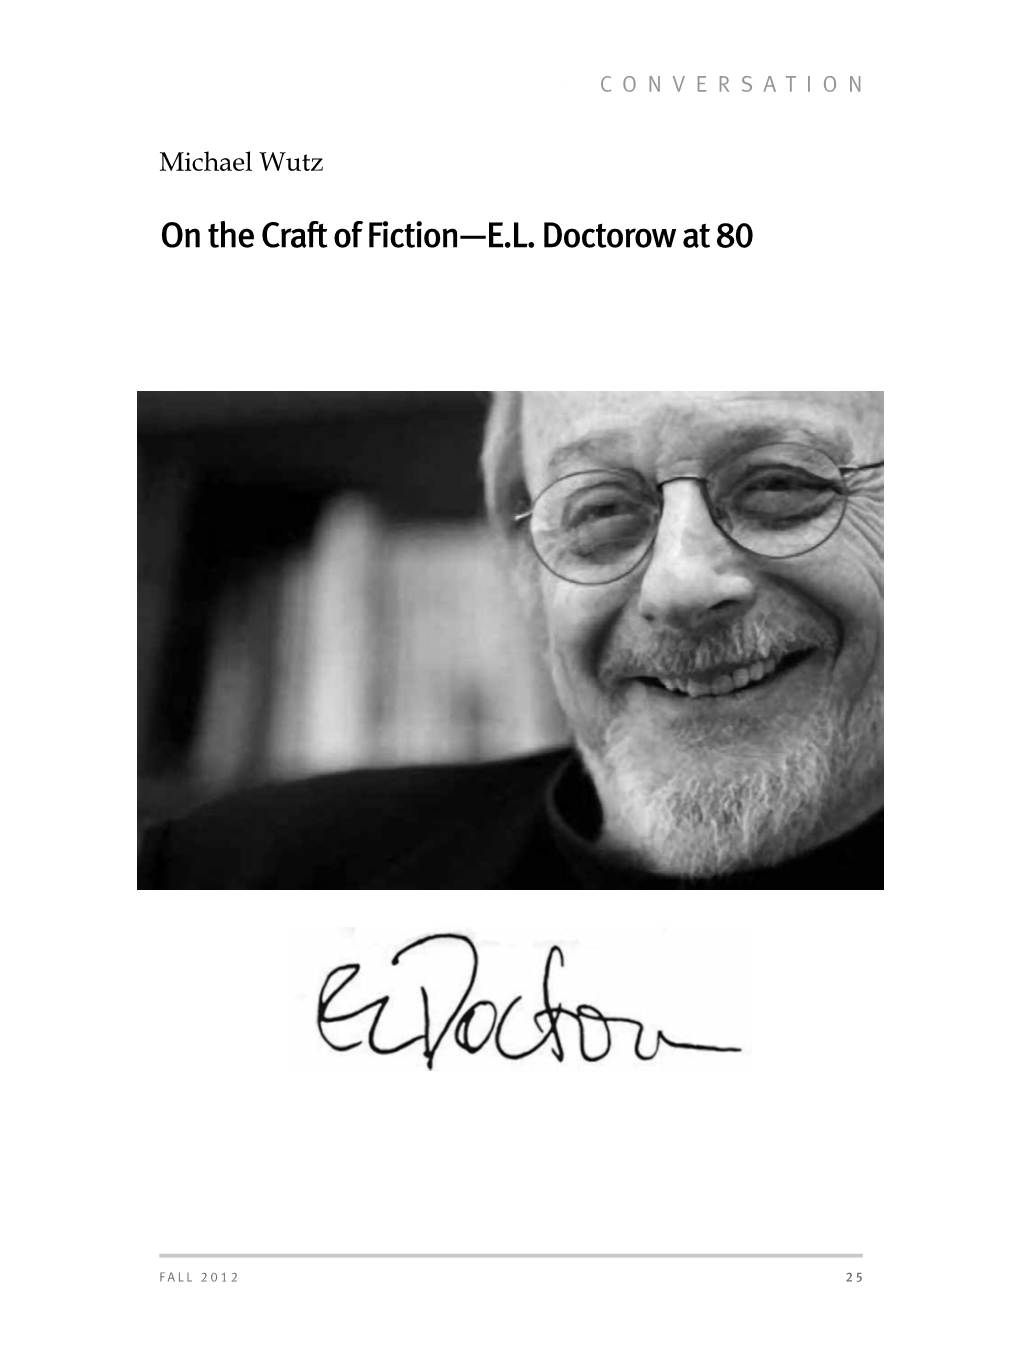 On the Craft of Fiction—E.L. Doctorow at 80